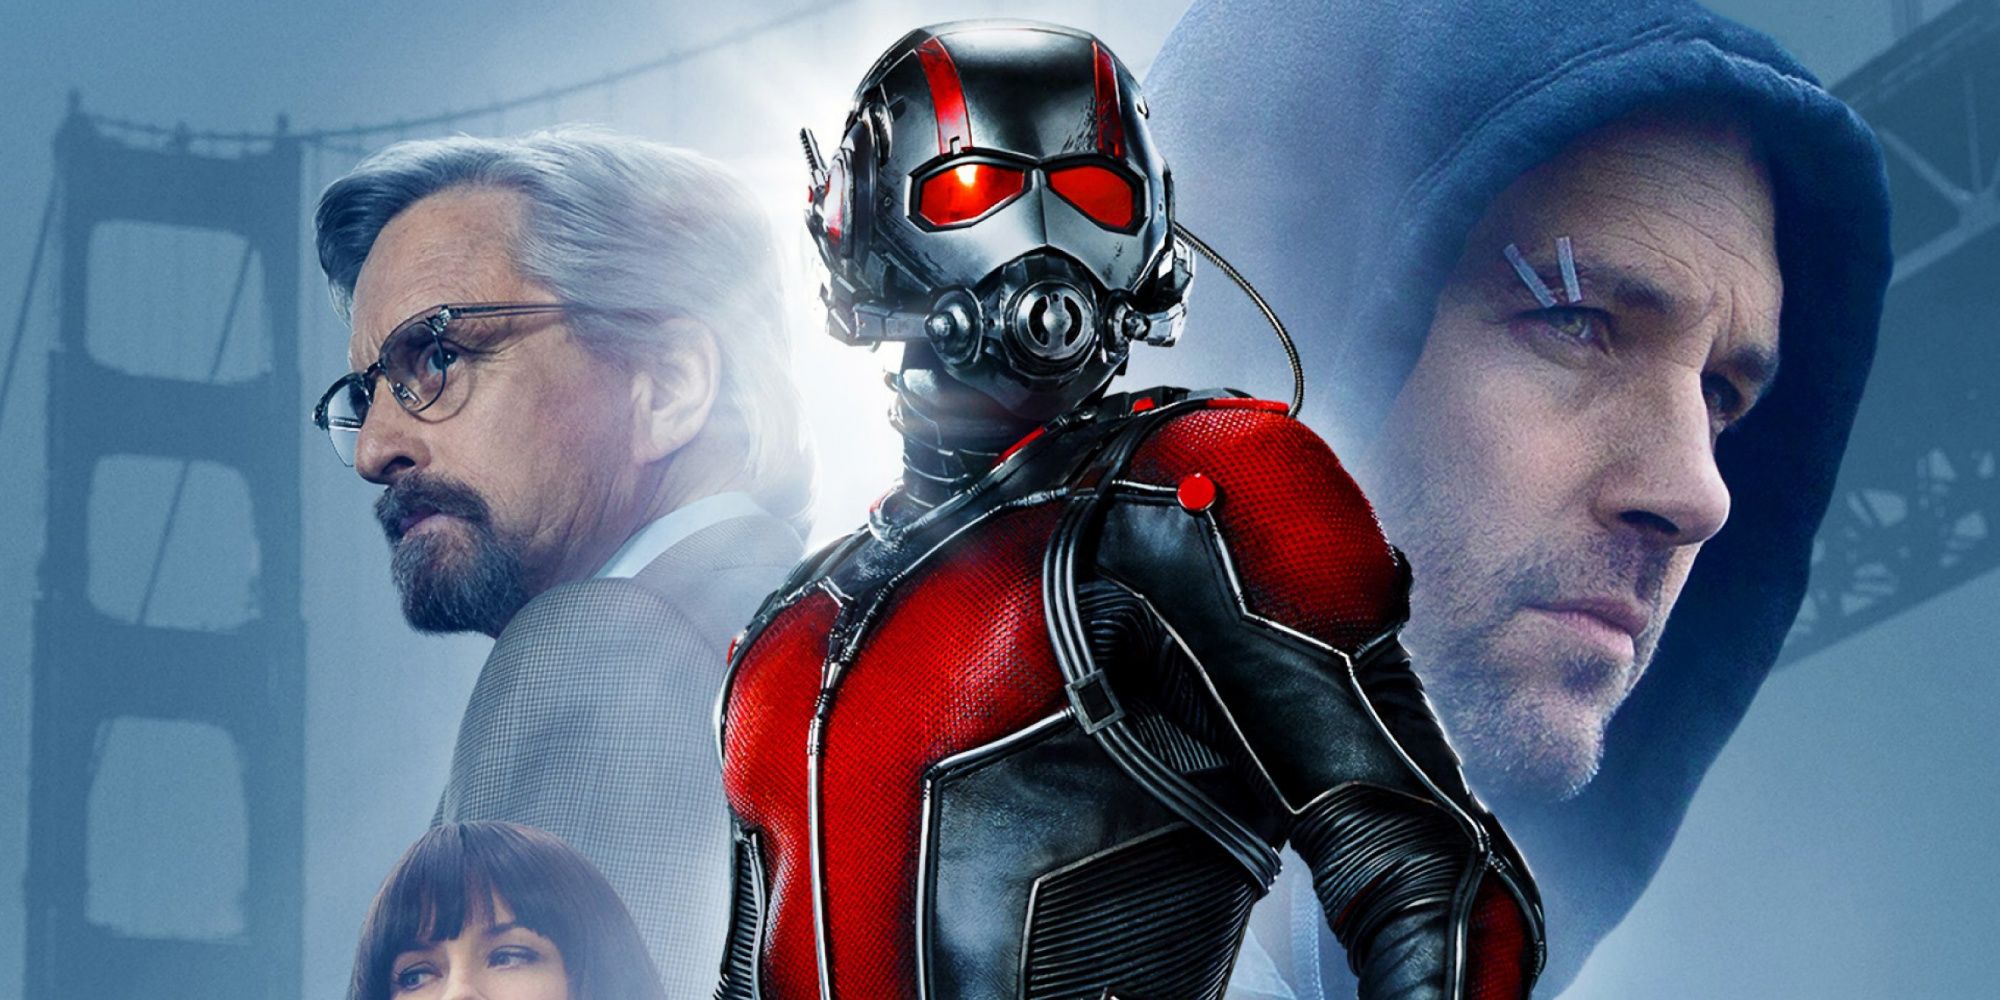 Ant-Man centering side by side images of Hank Pym and Scott Lang